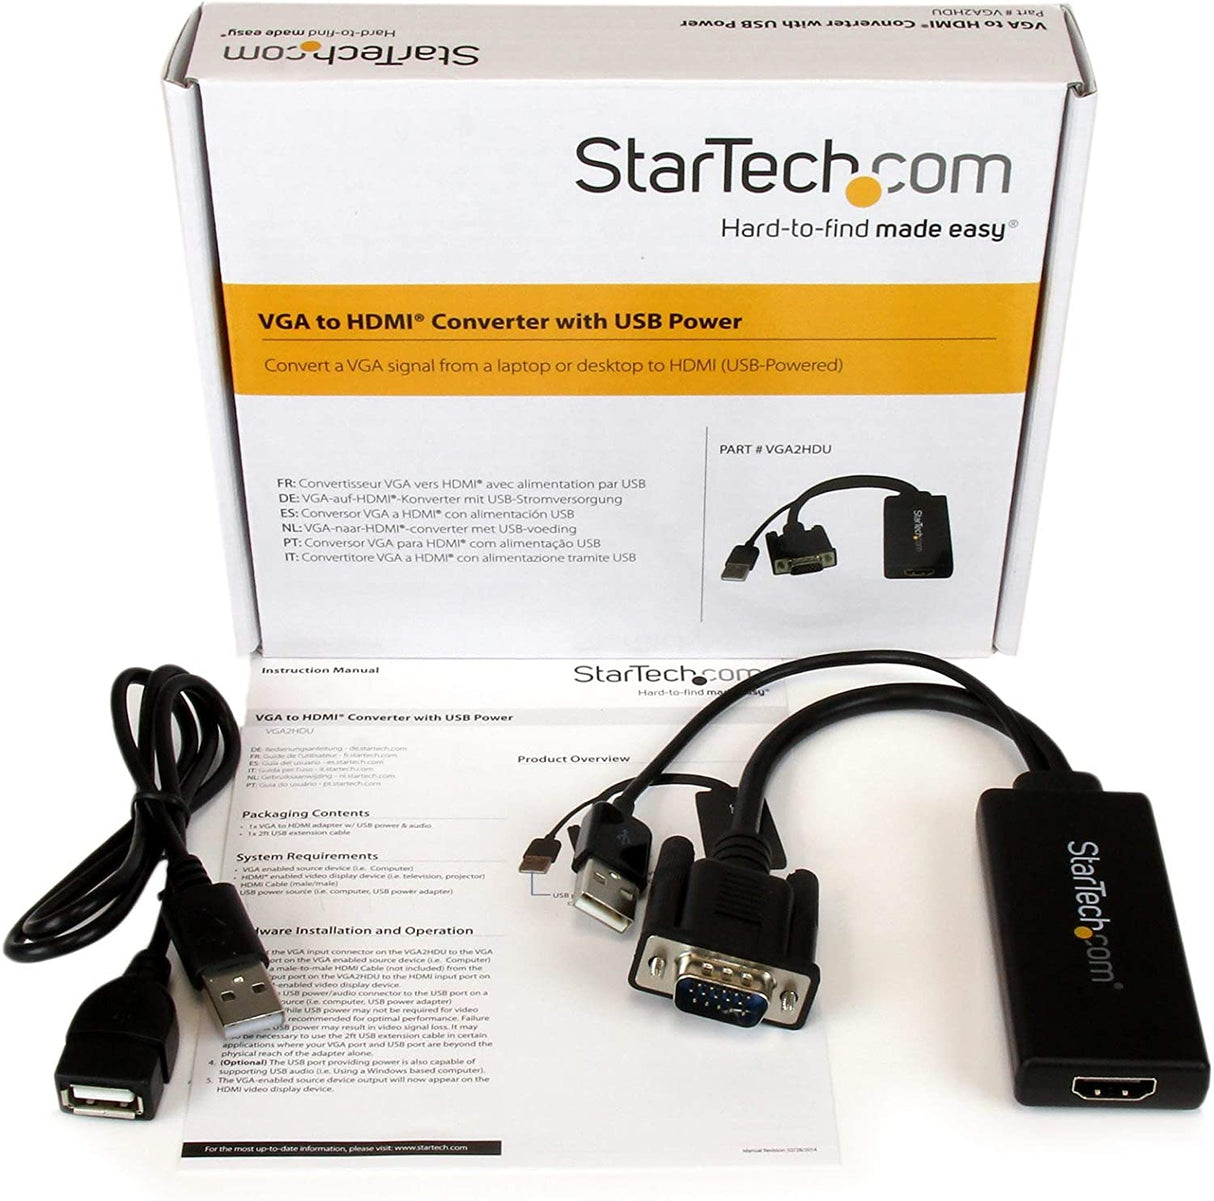 StarTech.com VGA to HDMI Adapter with USB Audio - VGA to HDMI Converter for Your Laptop / PC to HDTV - AV to HDMI Connector (VGA2HDU)